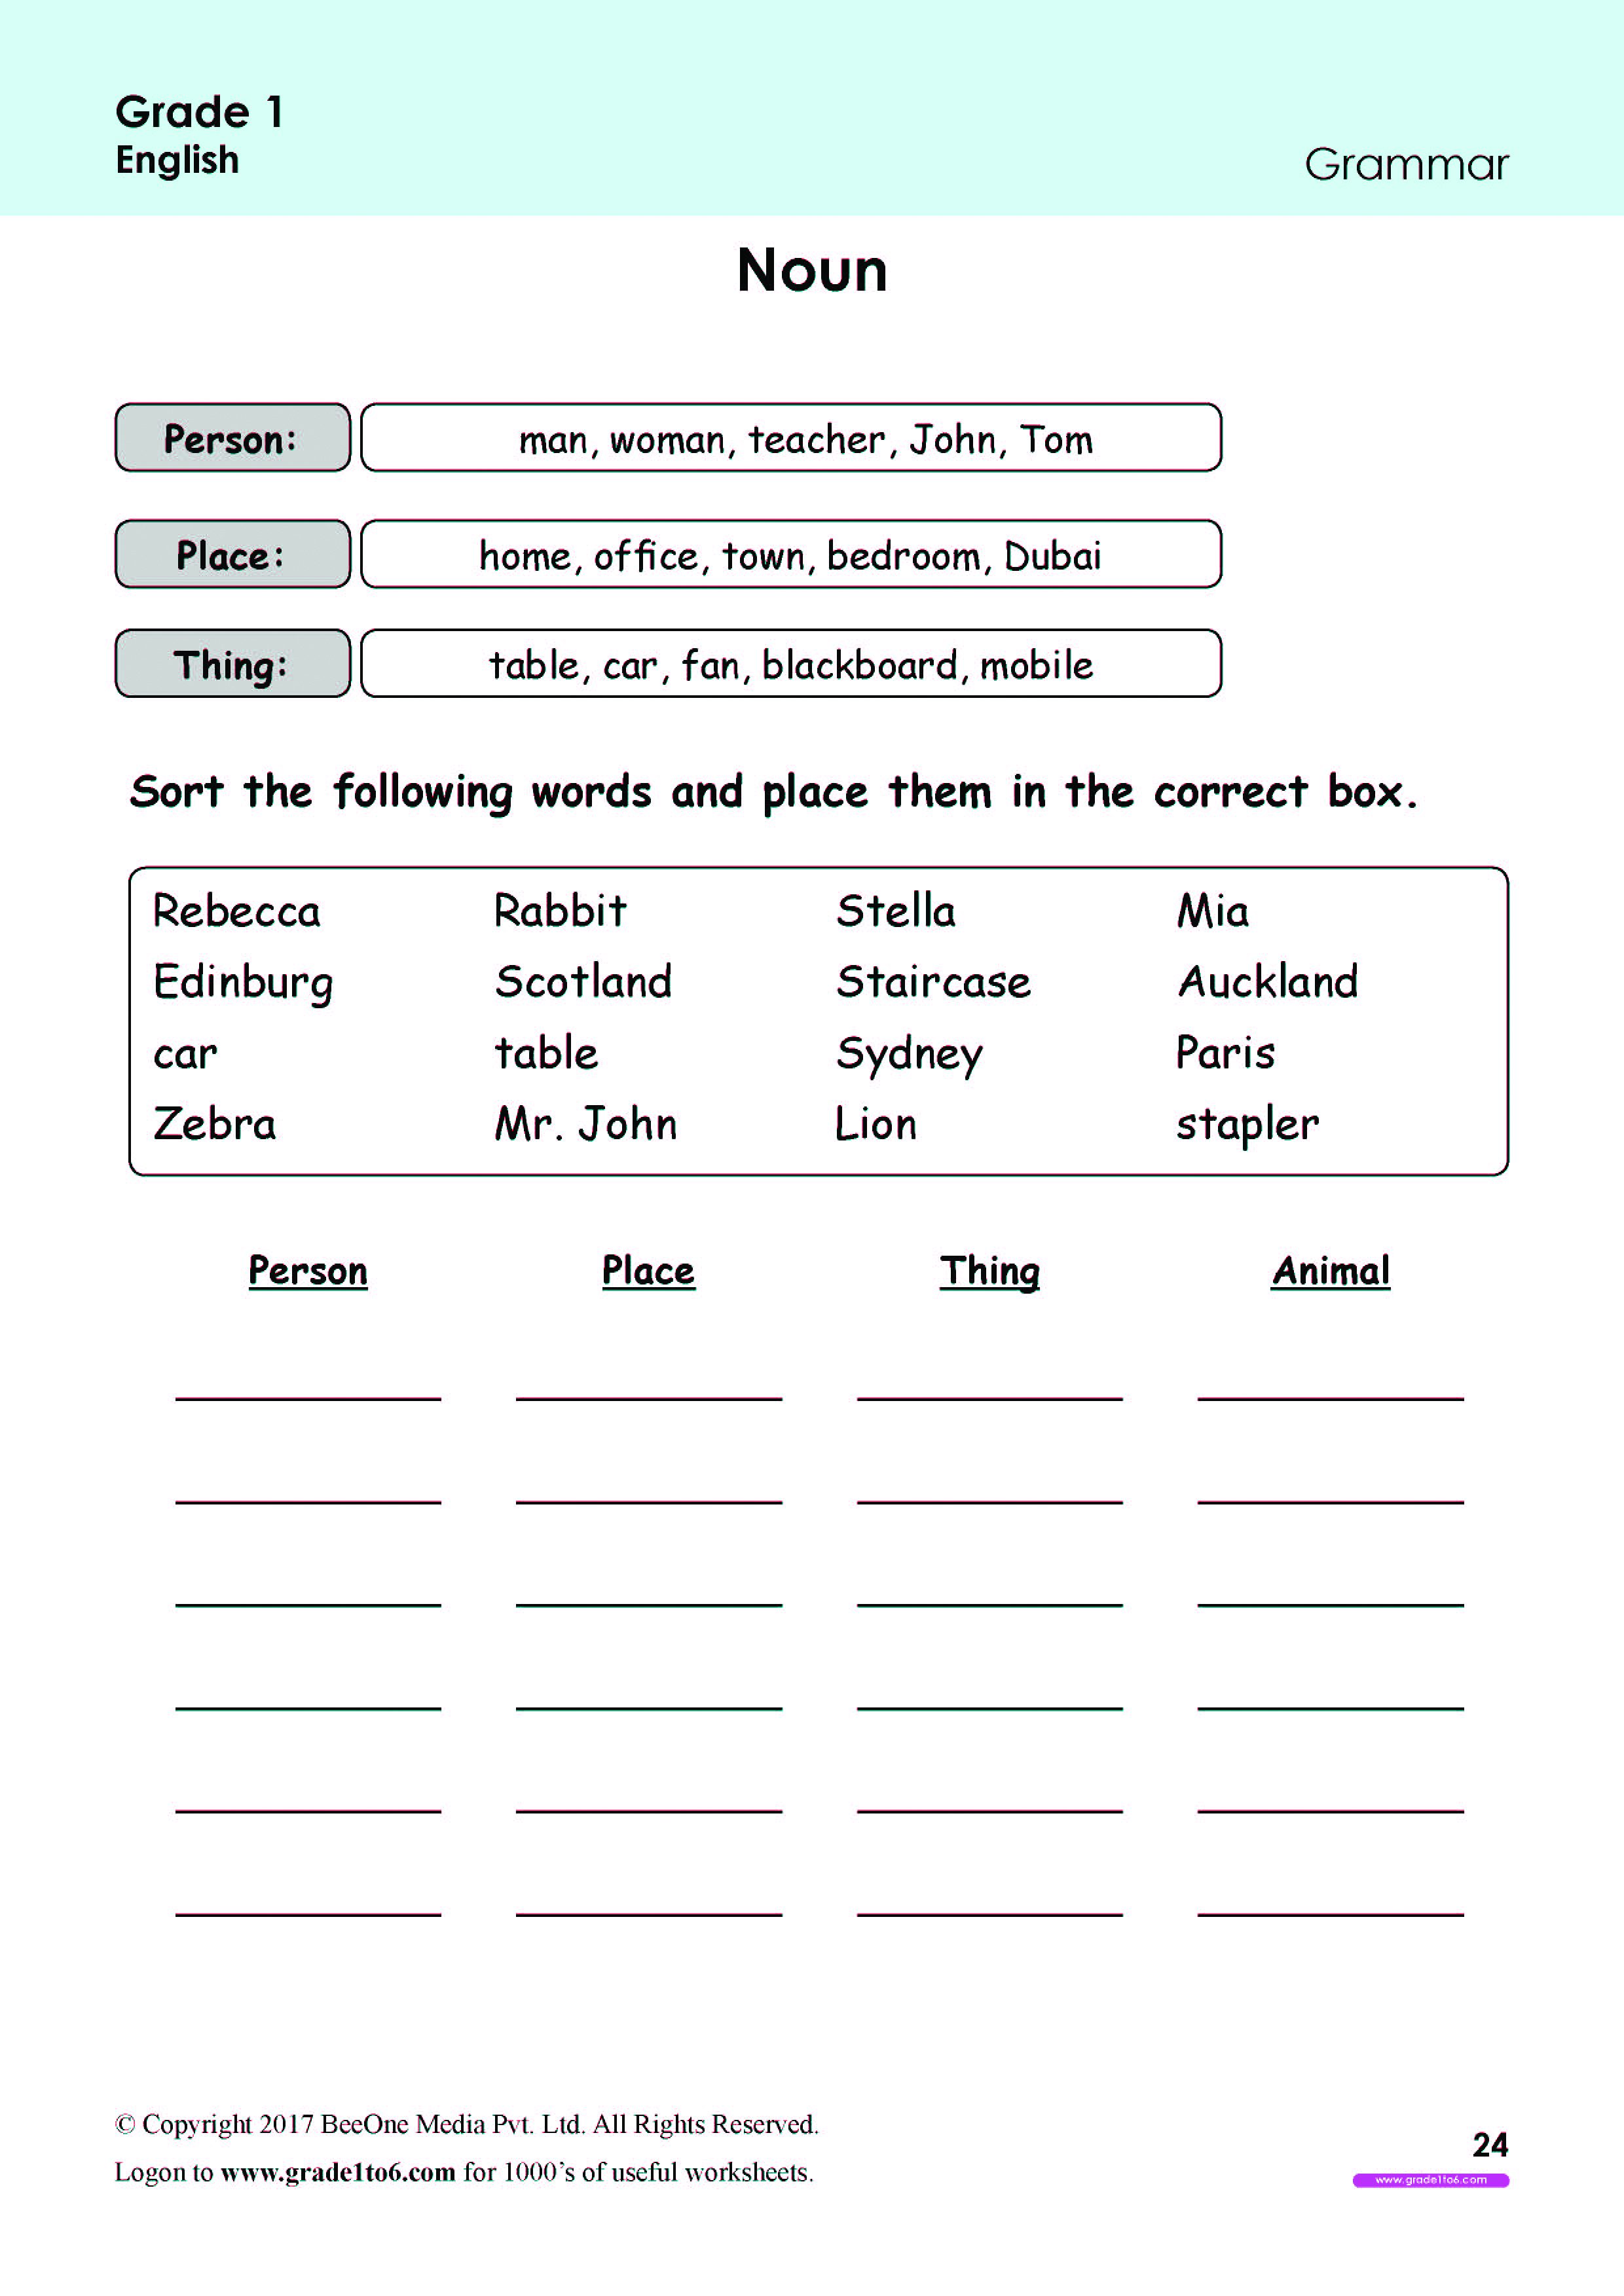 sorting nouns worksheets www grade1to6 com